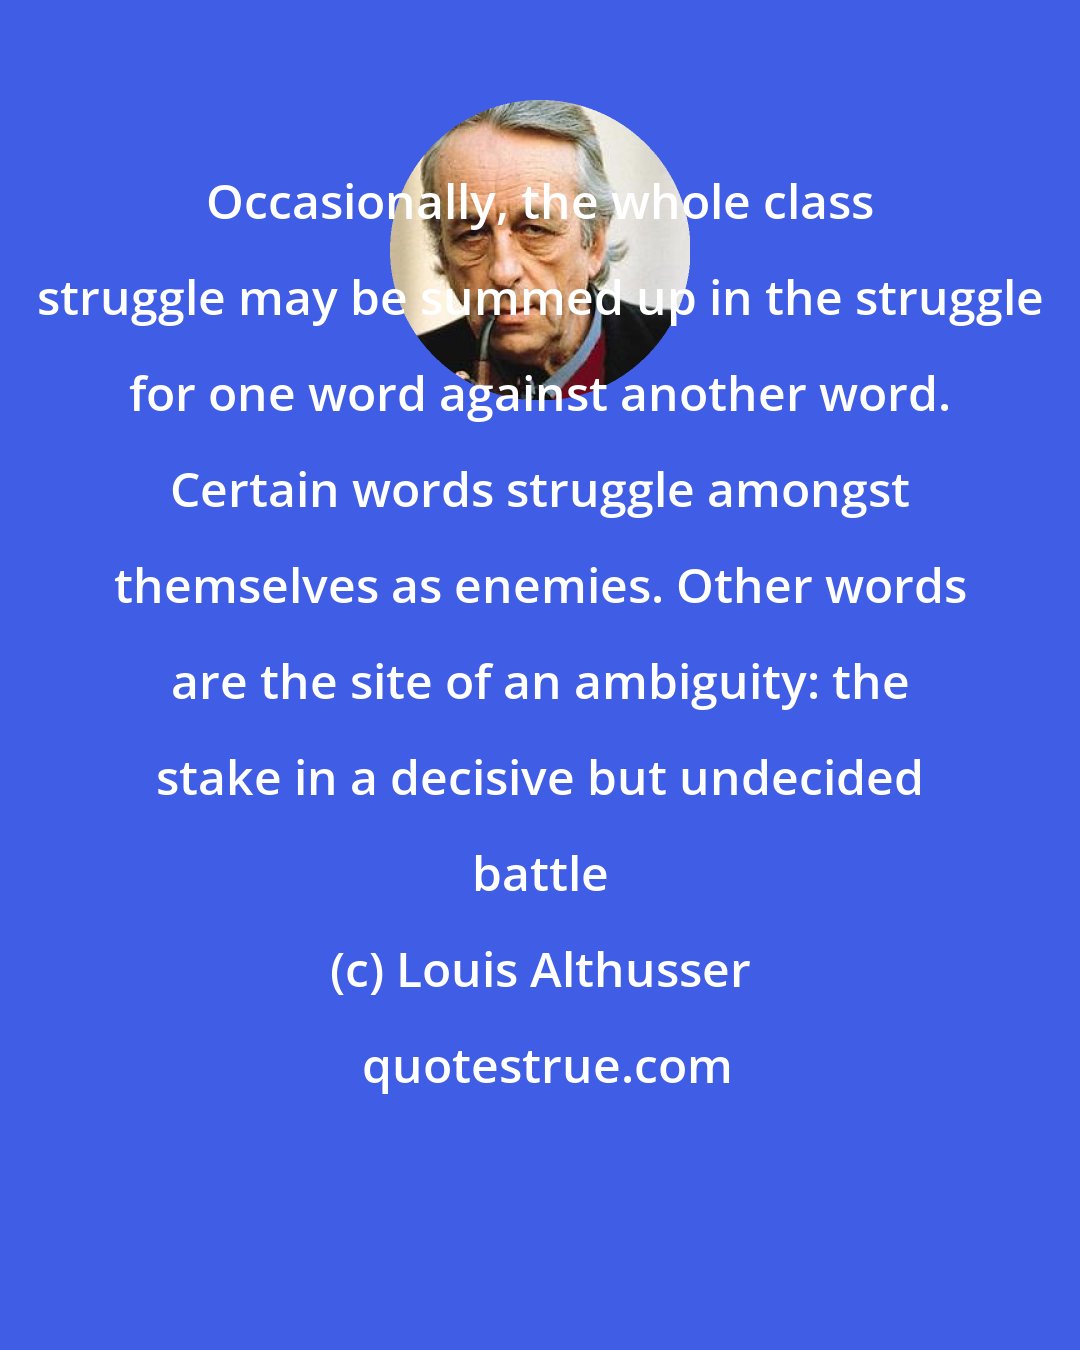 Louis Althusser: Occasionally, the whole class struggle may be summed up in the struggle for one word against another word. Certain words struggle amongst themselves as enemies. Other words are the site of an ambiguity: the stake in a decisive but undecided battle